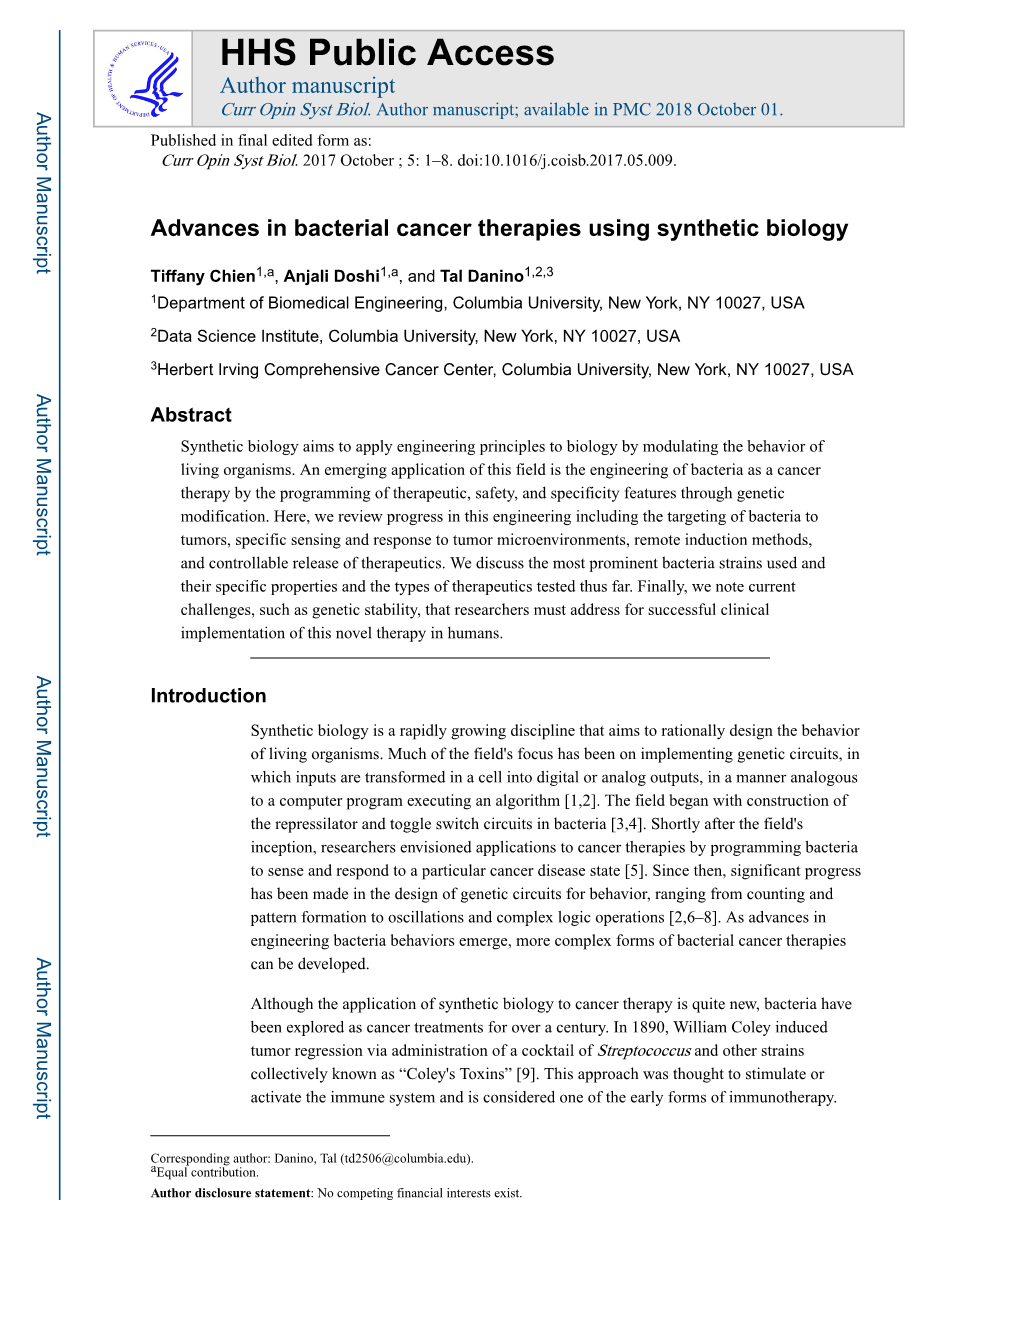 Advances in Bacterial Cancer Therapies Using Synthetic Biology